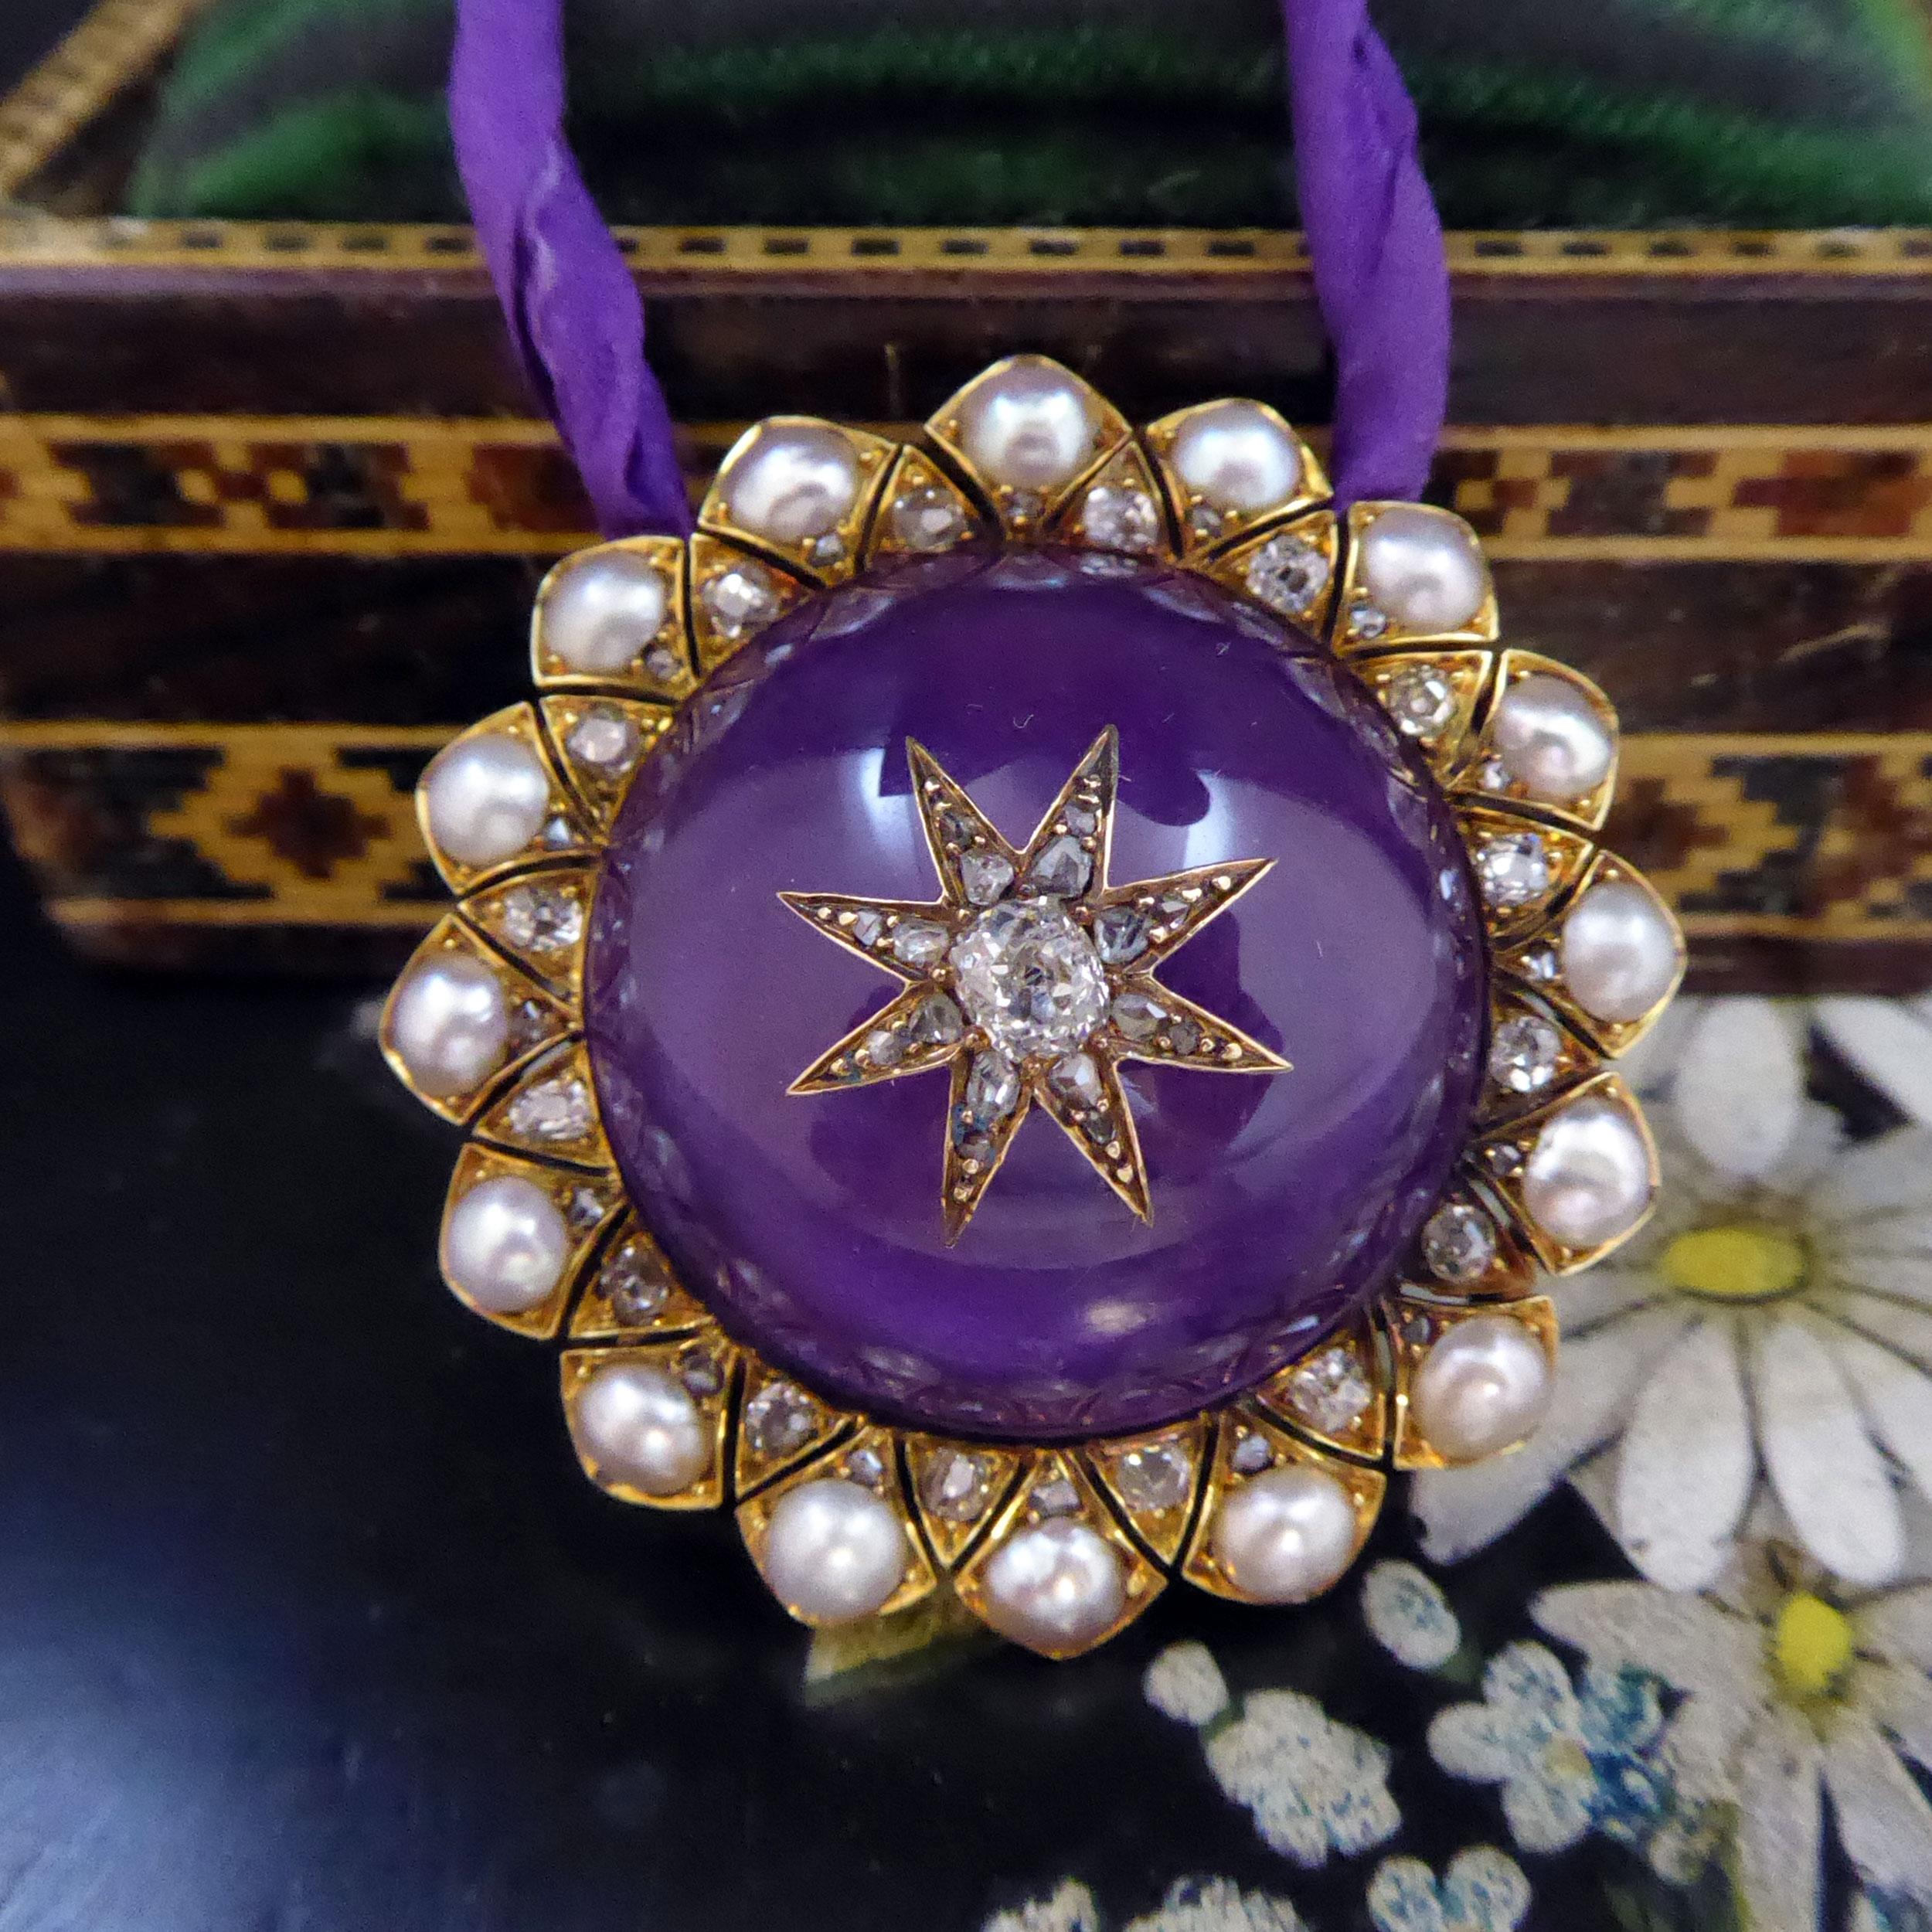 A fabulous cabochon cut amethyst is the stand out feature of this Victorian pendant.  The amethyst measures approx. 1 inch in diameter and it is set to the centre with an oval, old cut diamond in a diamond-studded, star-shaped mount.   A pearl and